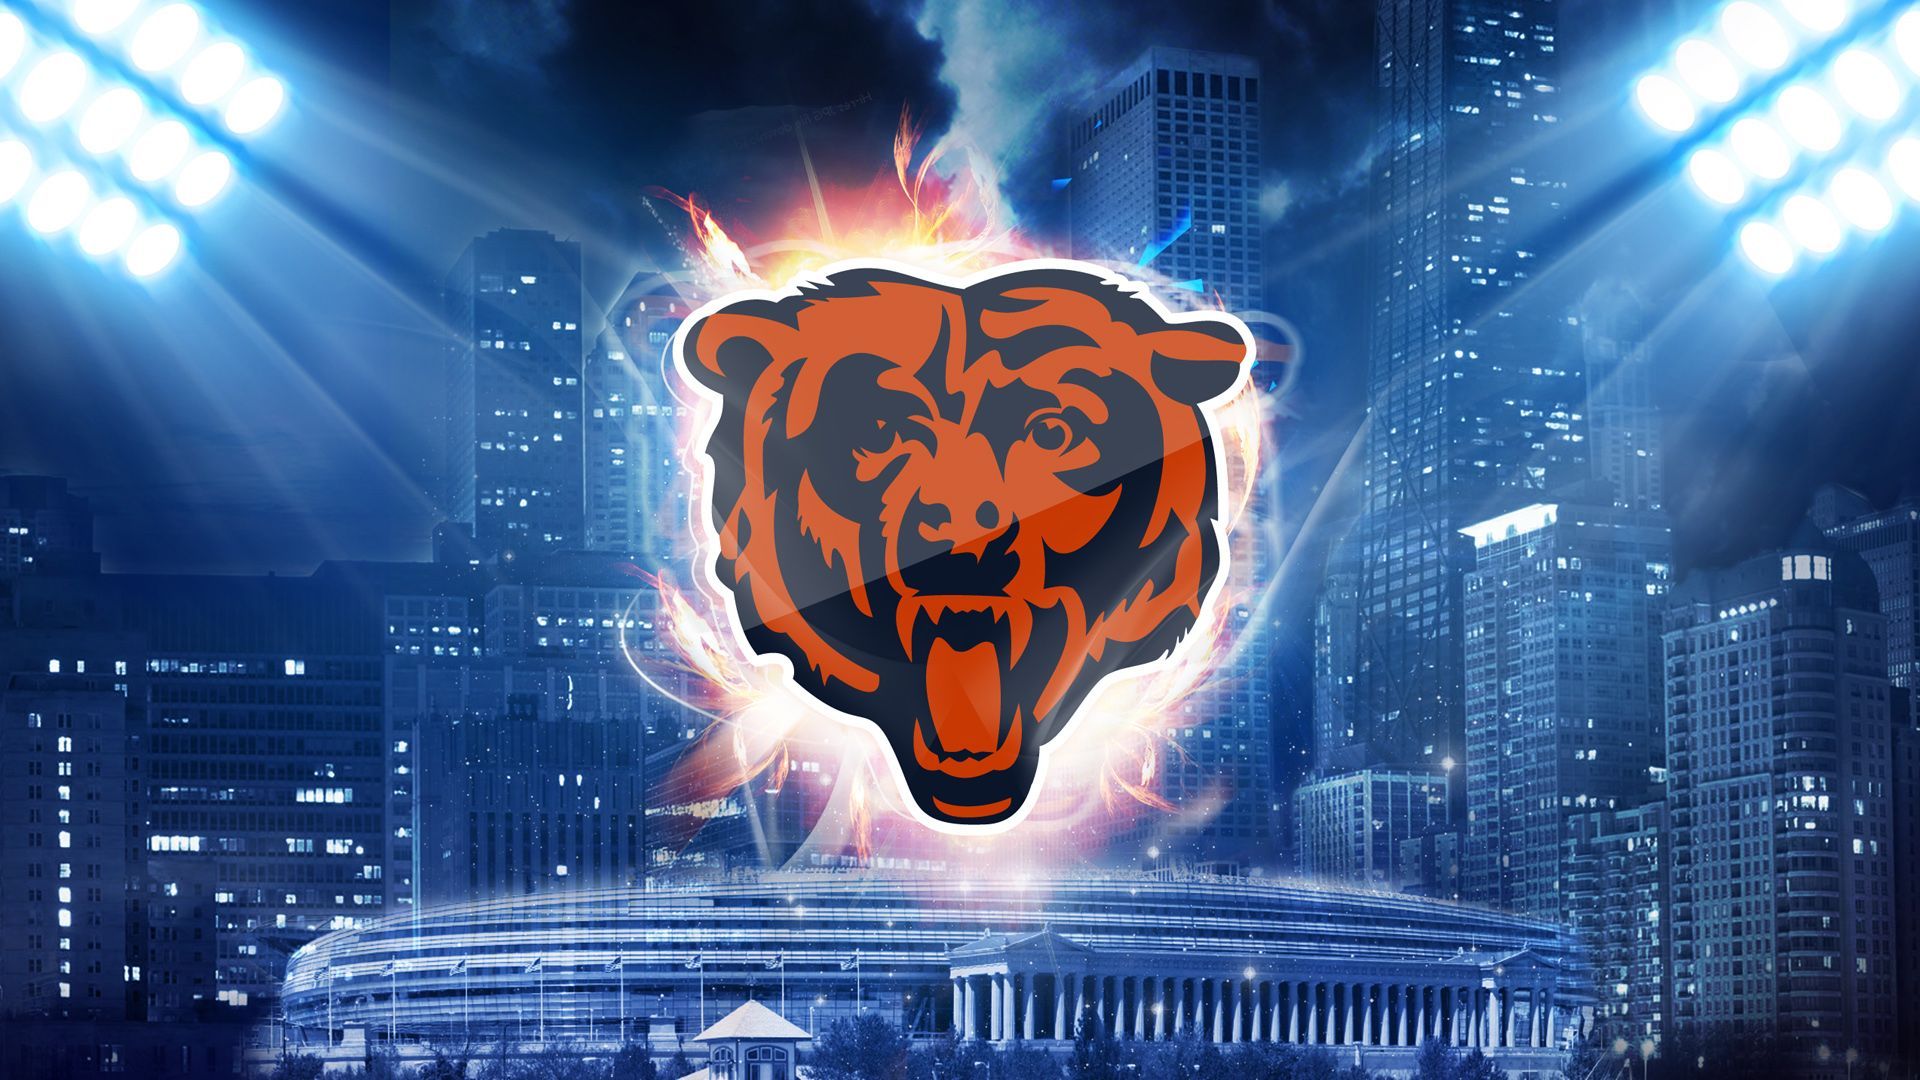 Chicago Bears 2013 Backgrounds